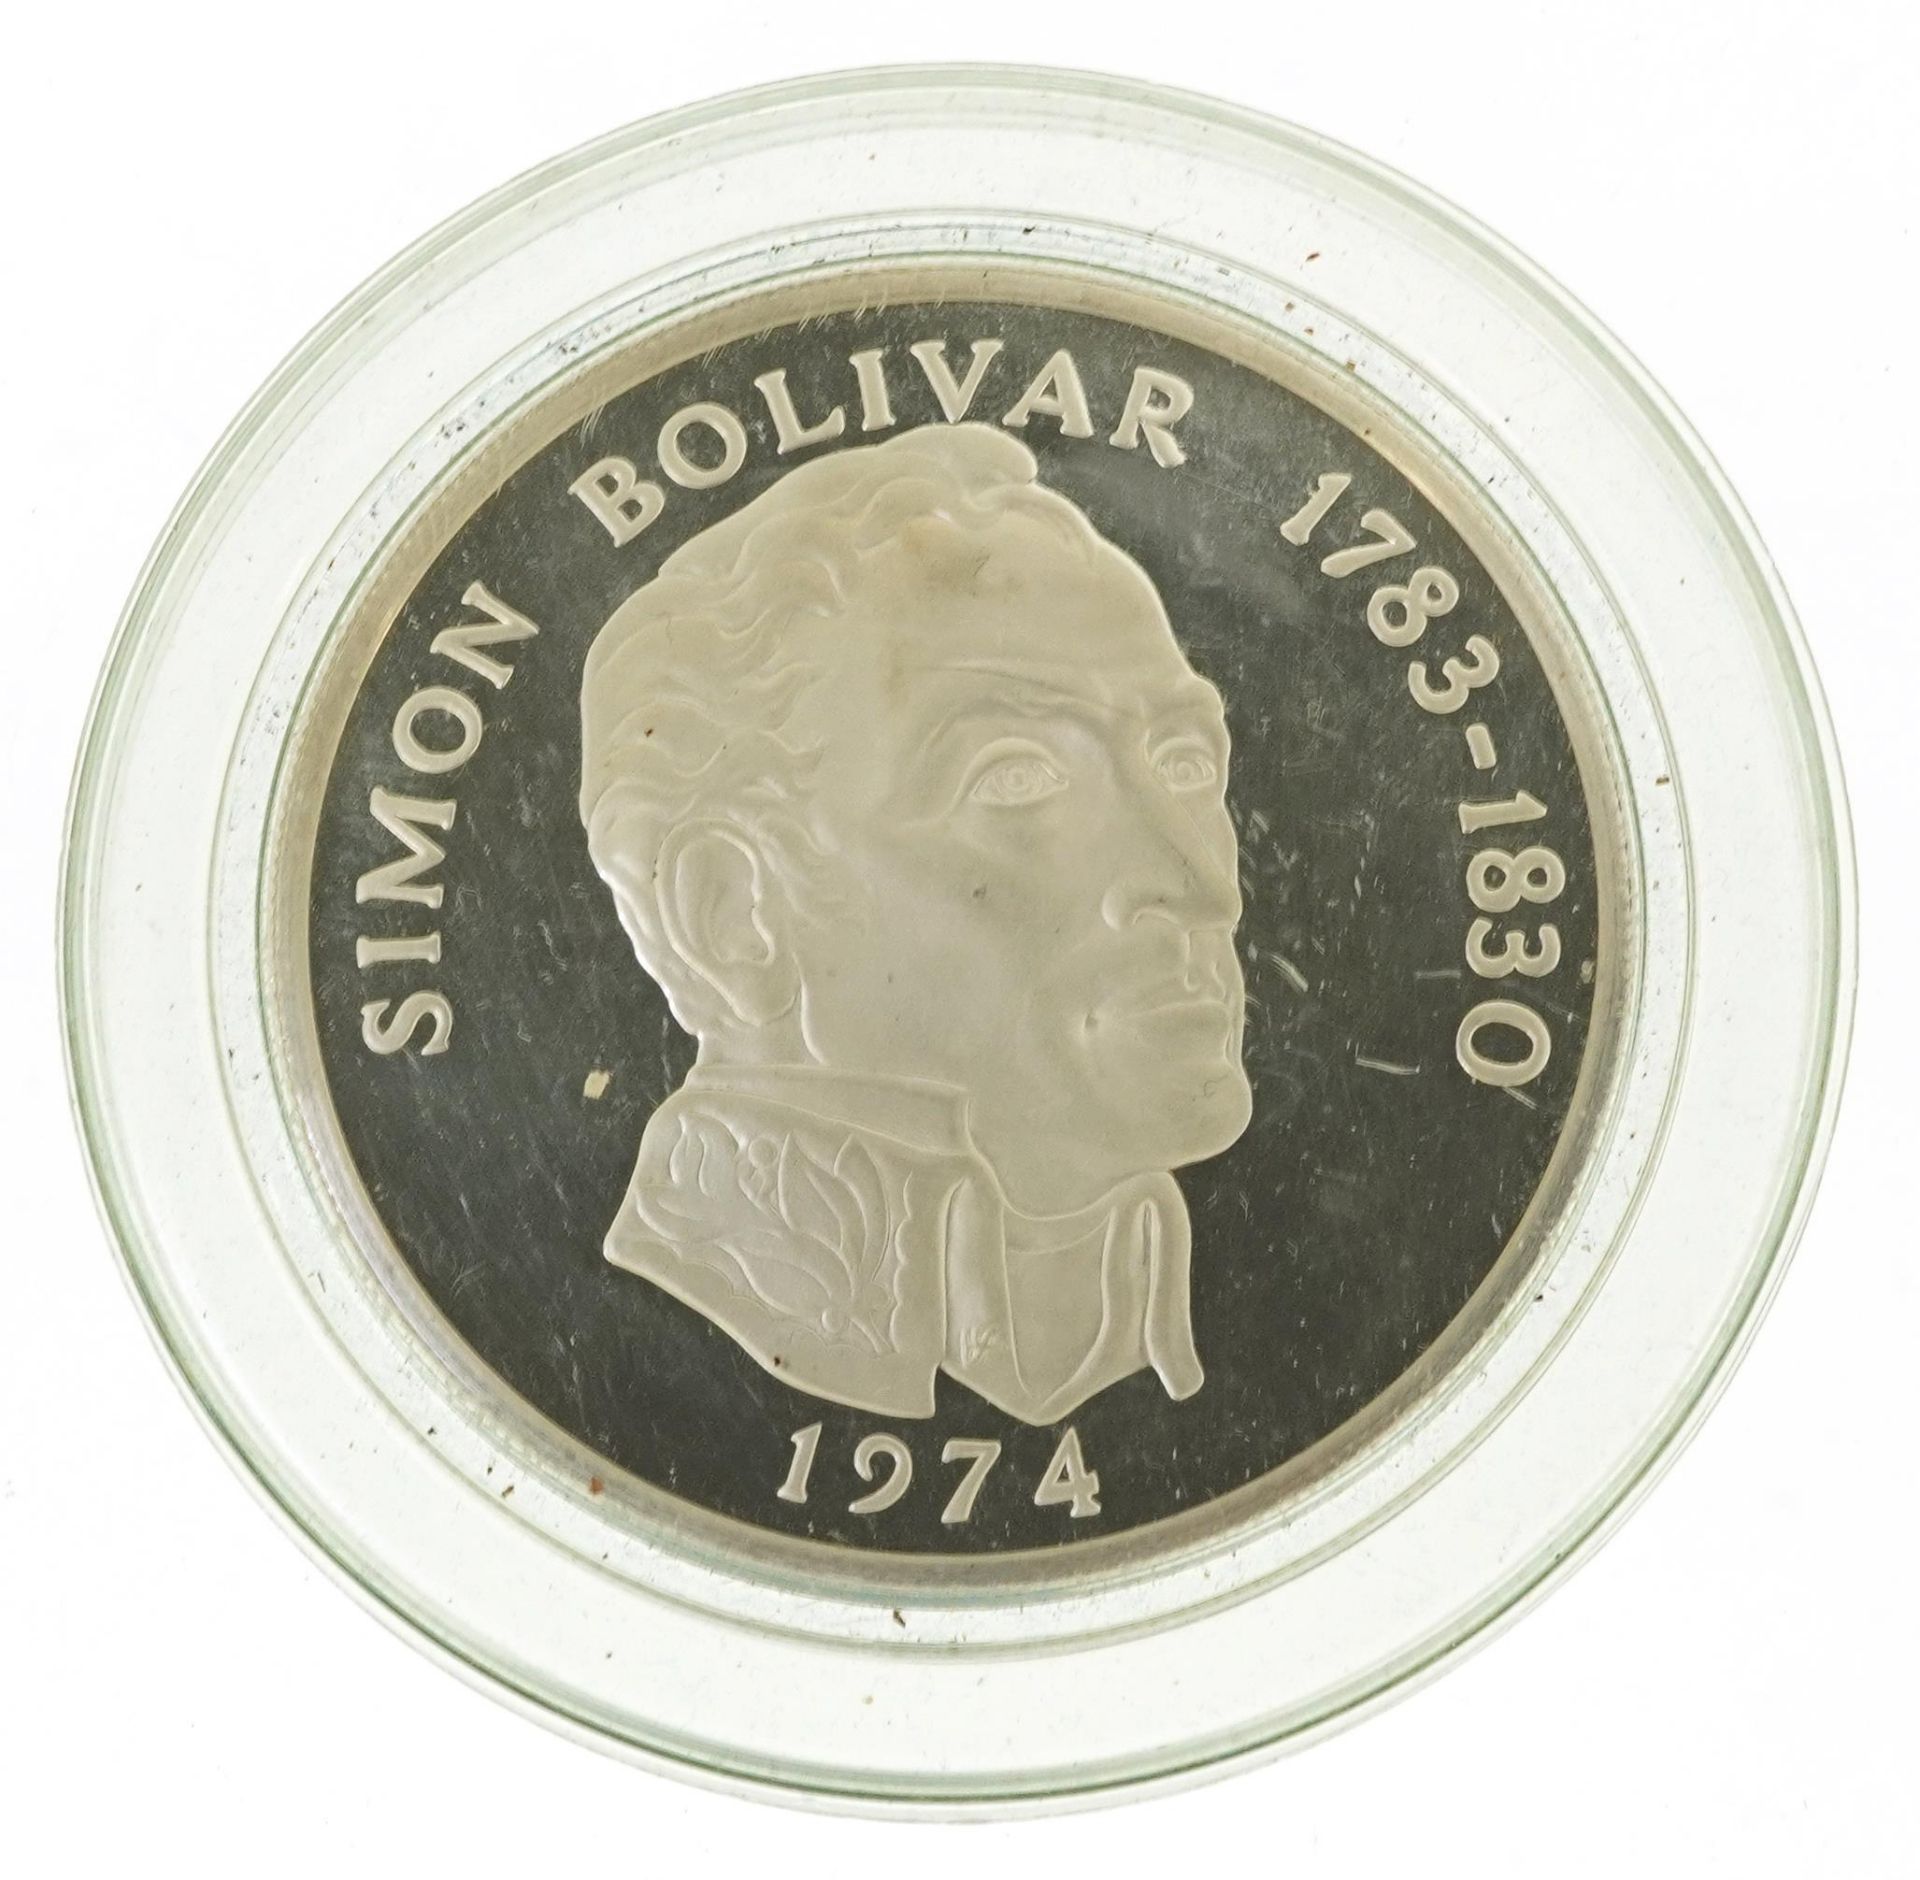 The Republic of Panama 1974 silver twenty Balboas : For further information on this lot please visit - Image 2 of 2